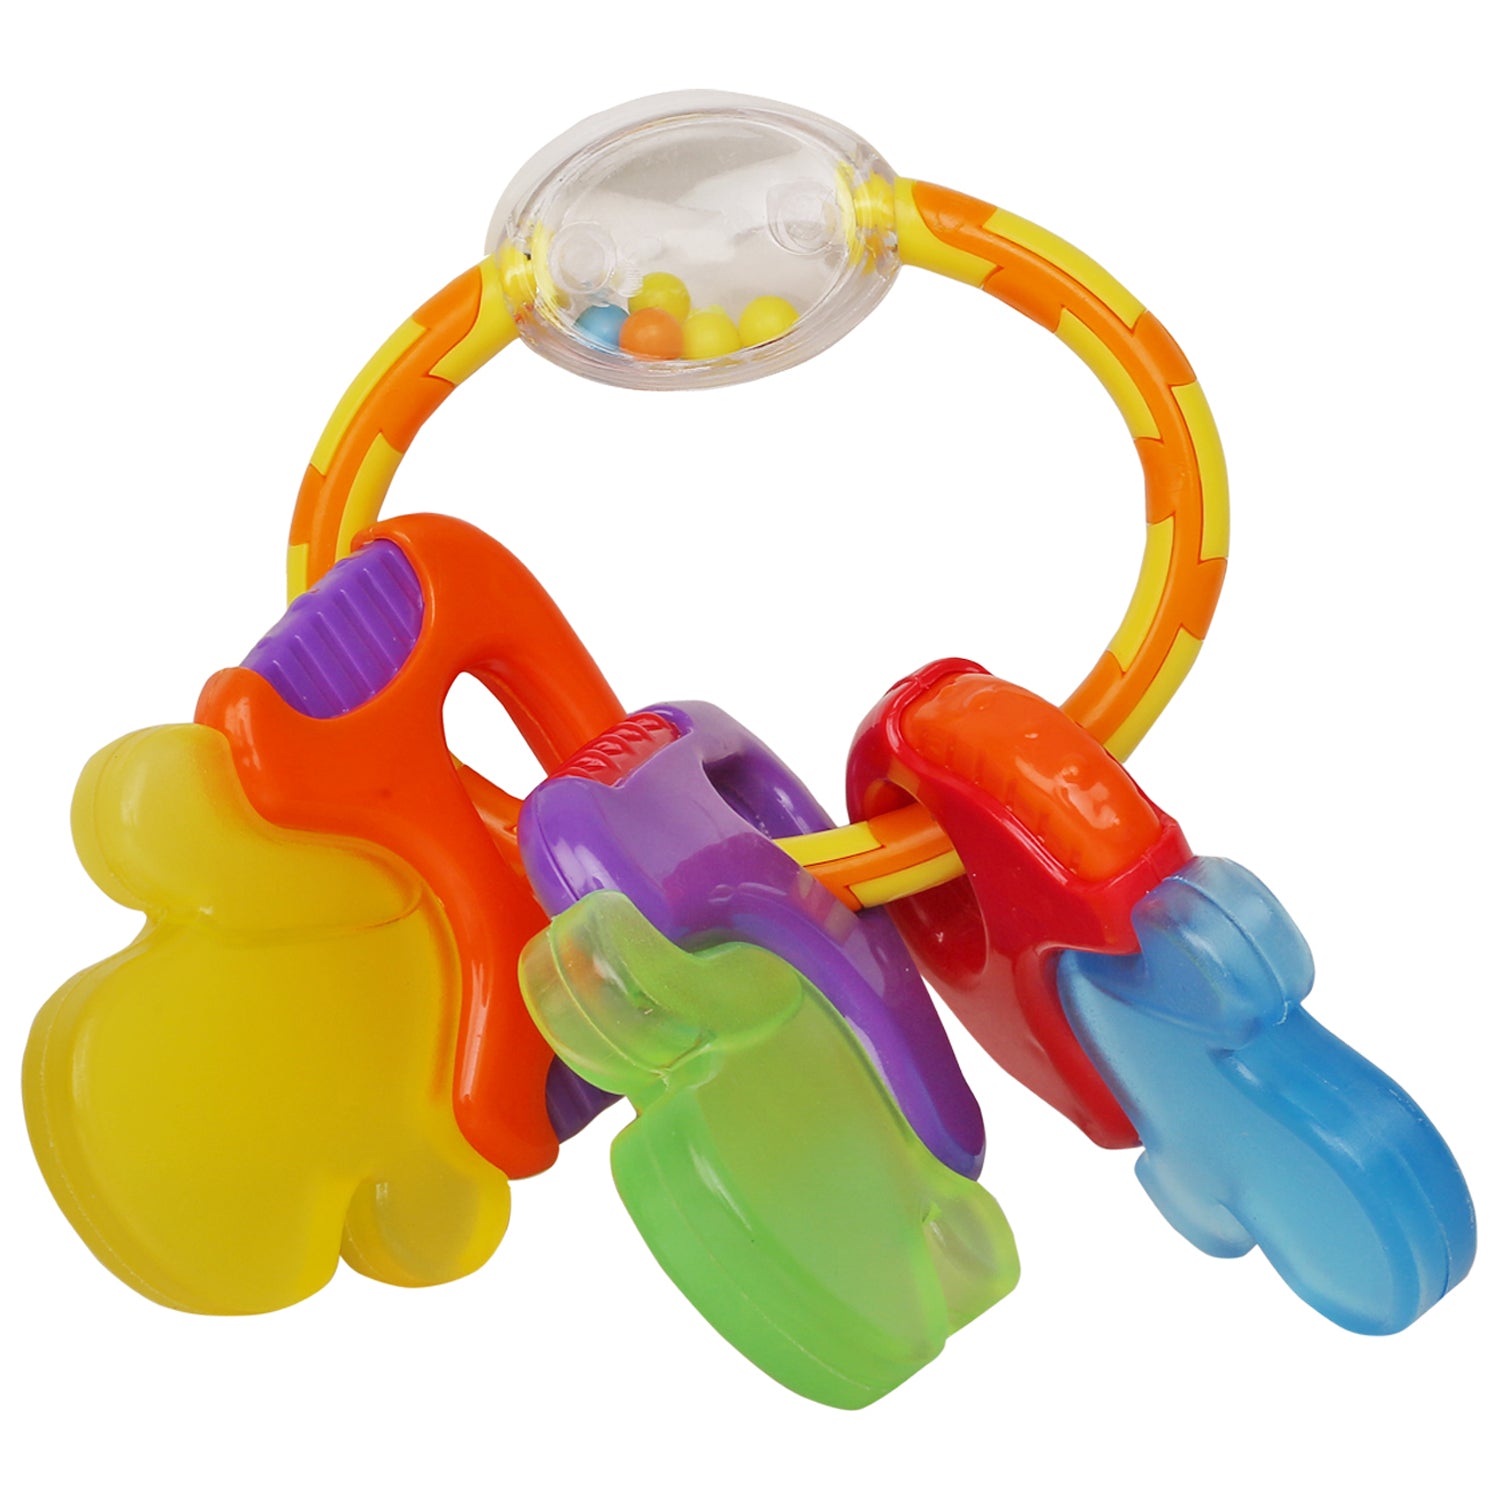 Baby Moo Bunch Of Multicolour Rattle Toy